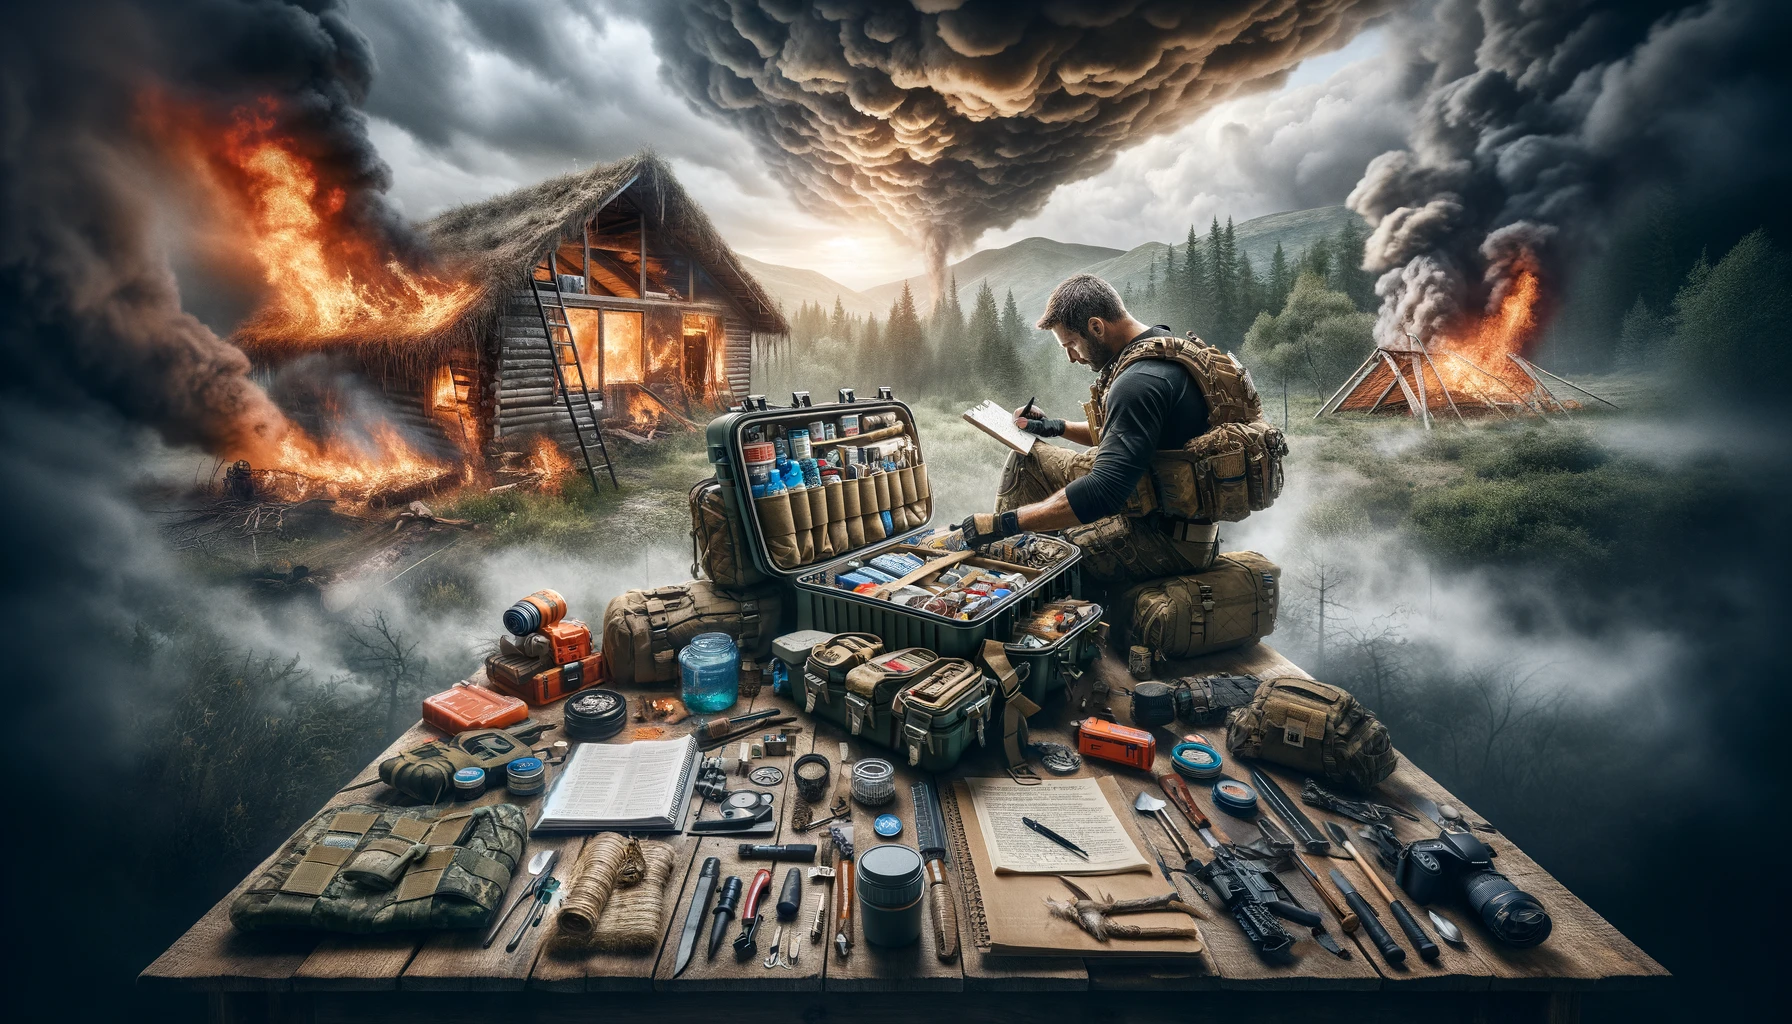 Powerful image showcasing the building of an emergency kit for preppers, set in a rugged outdoor environment with a focus on wilderness survival. Features an open emergency kit filled with essentials like water filters, fire starters, food packs, first aid, navigation tools, and communication devices. A prepper in tactical gear organizes the kit, surrounded by natural resources useful for survival, against a backdrop hinting at various emergencies like wildfires and storms, embodying the prepper spirit of readiness, resilience, and thriving in adversity